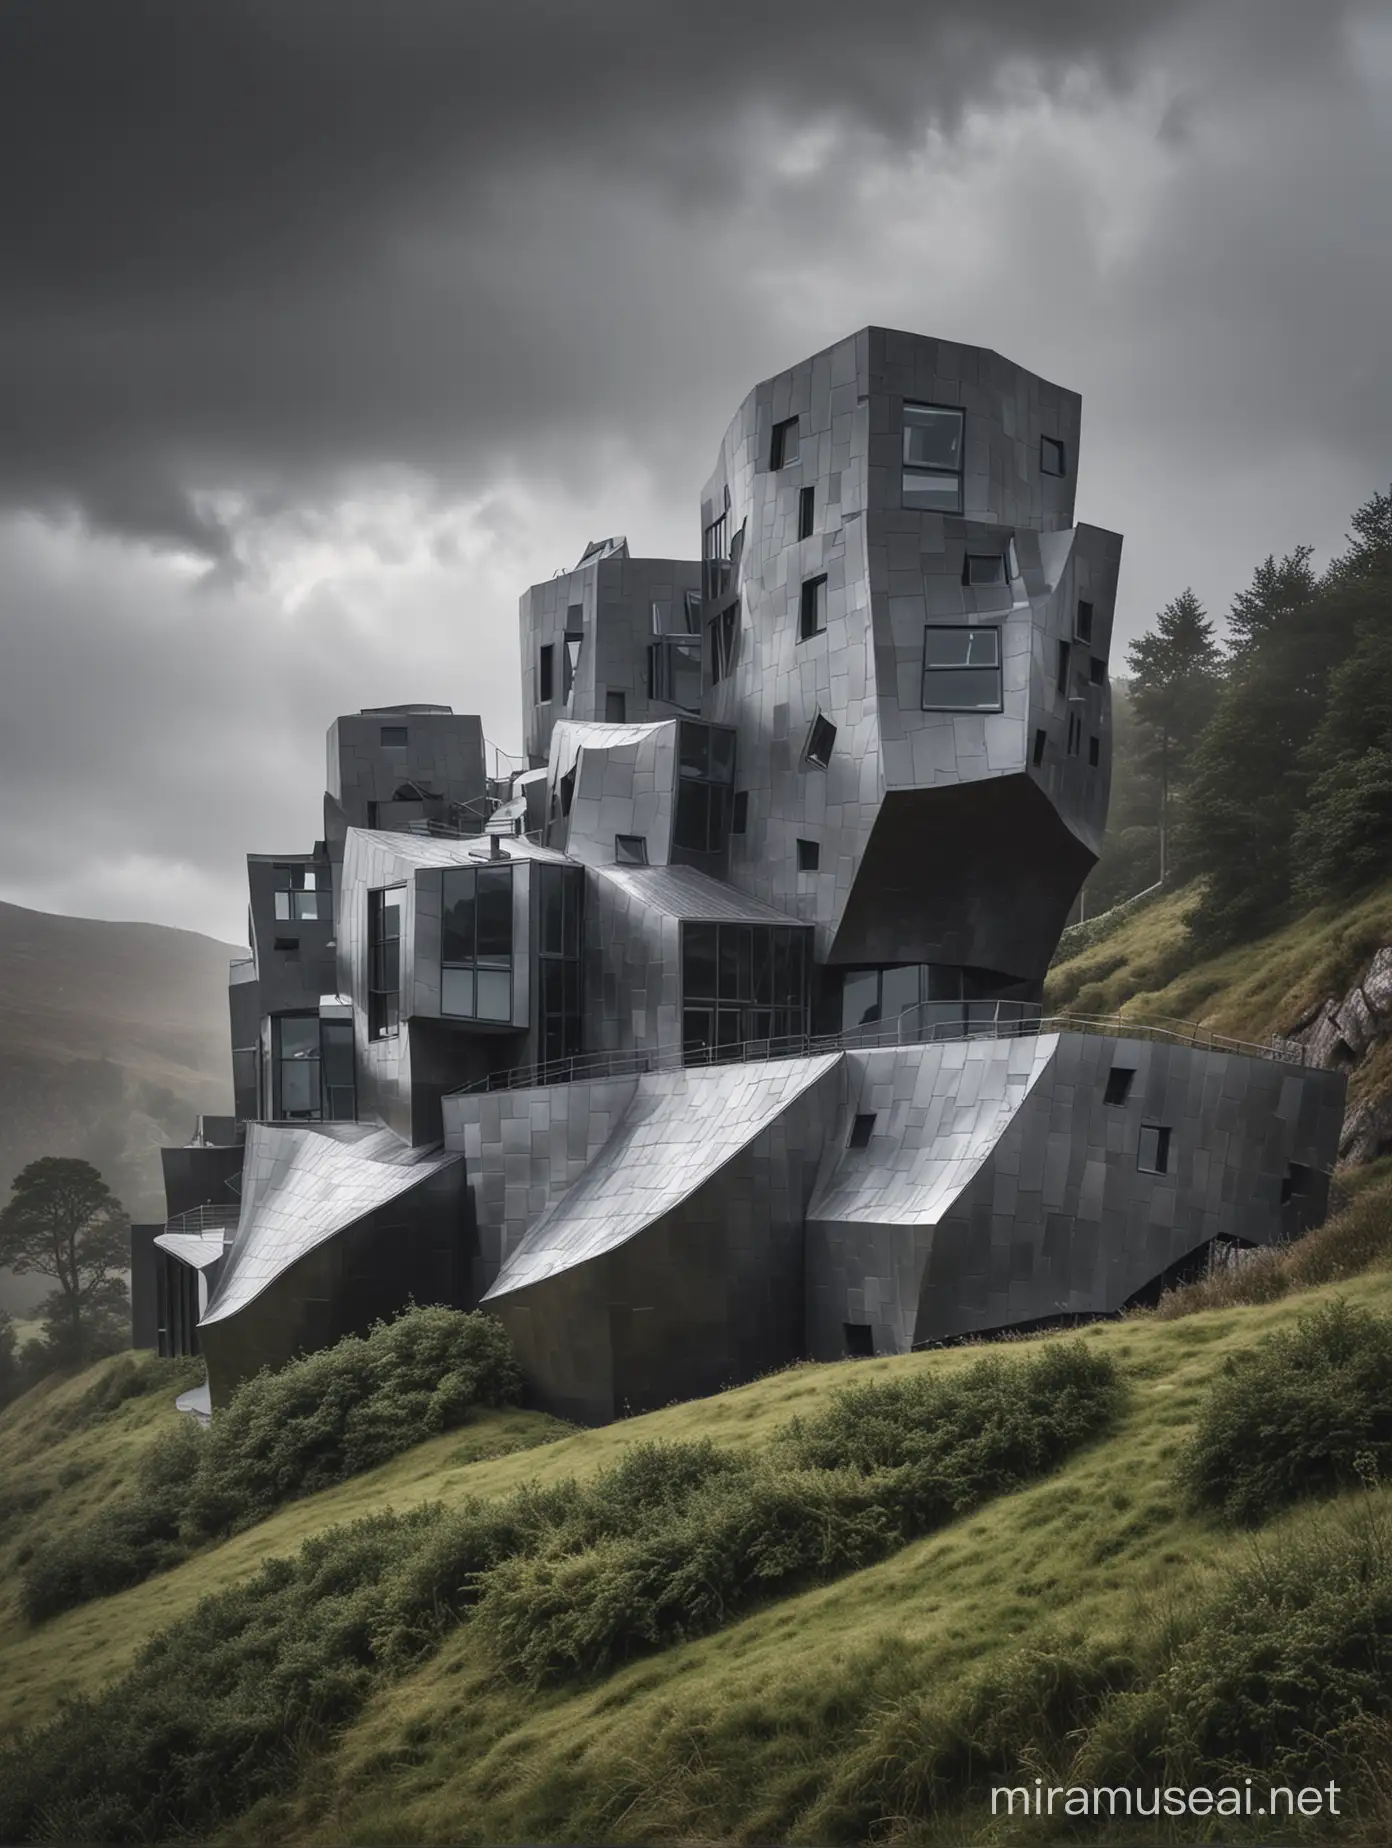 Frank Gehry Style Architecture in Scotland Marble Black Structures Amidst Fog and Thunder